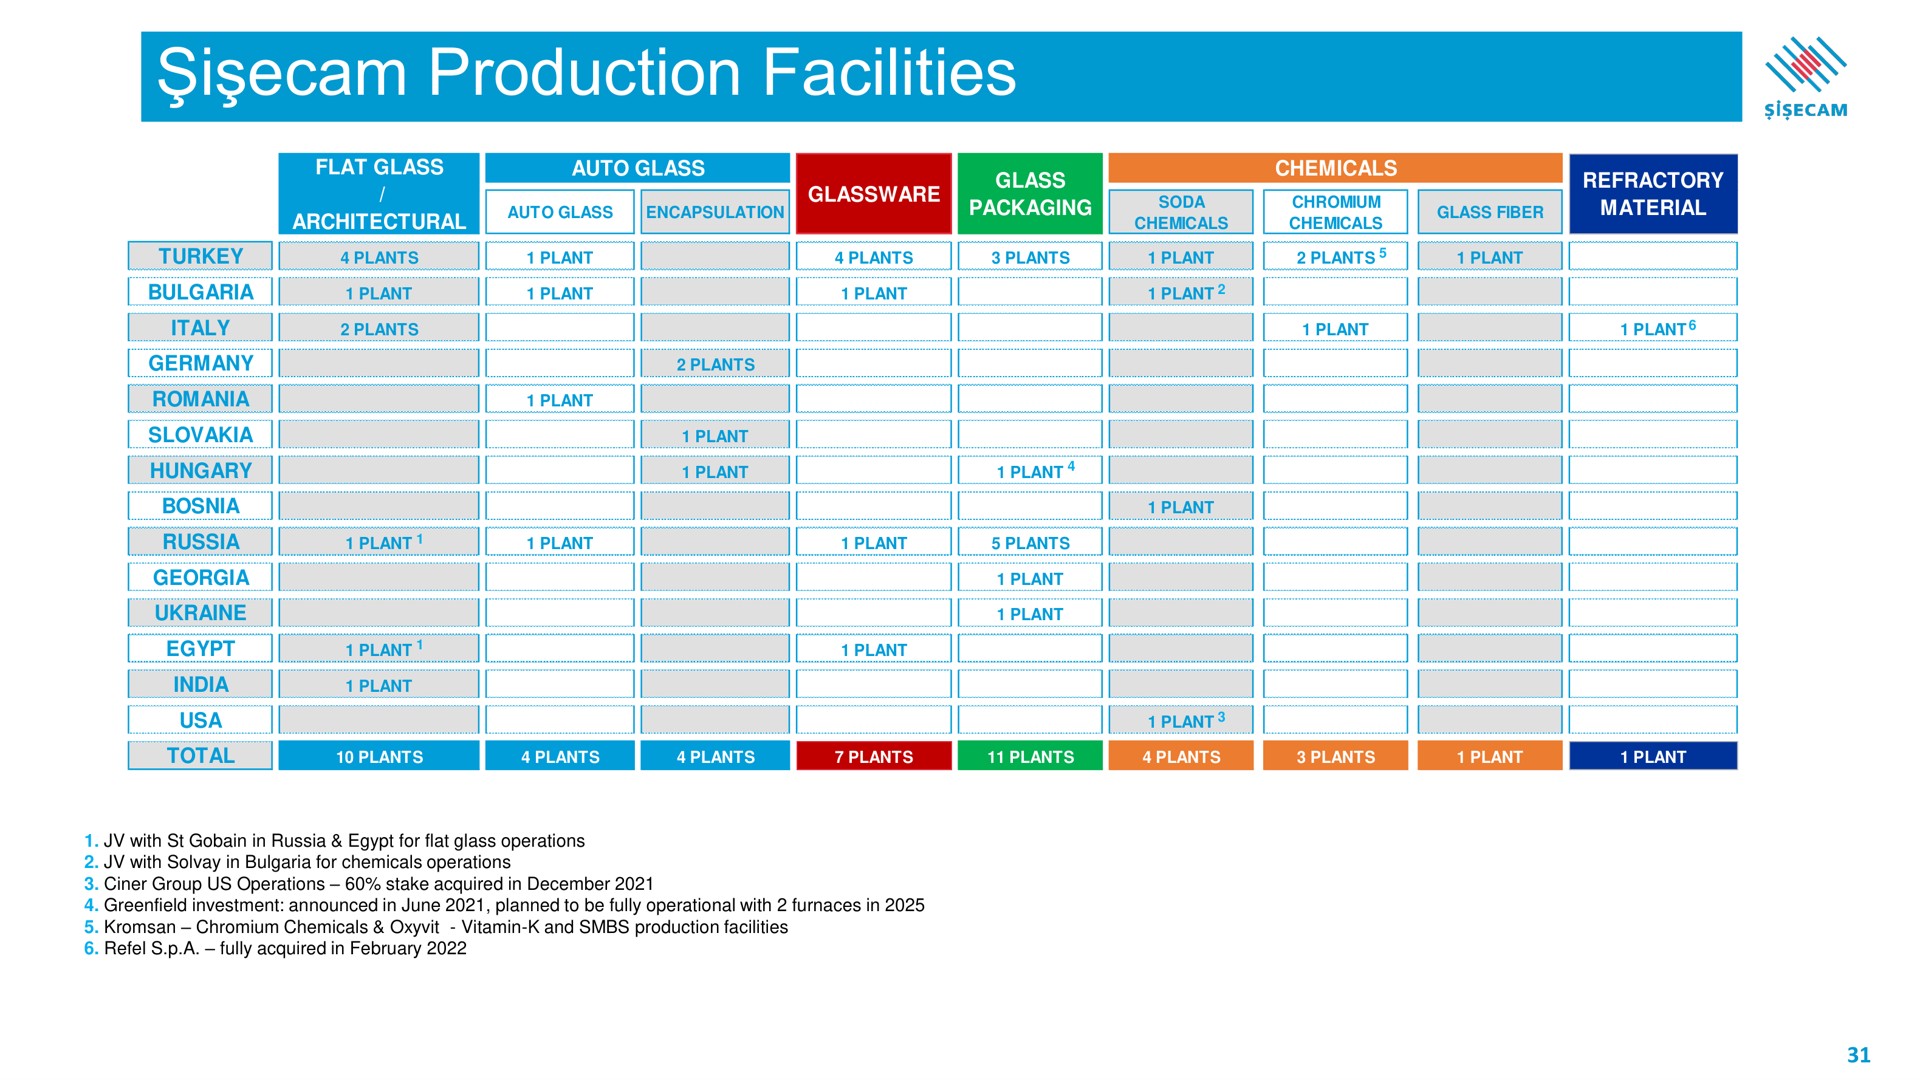 i production facilities | Sisecam Resources